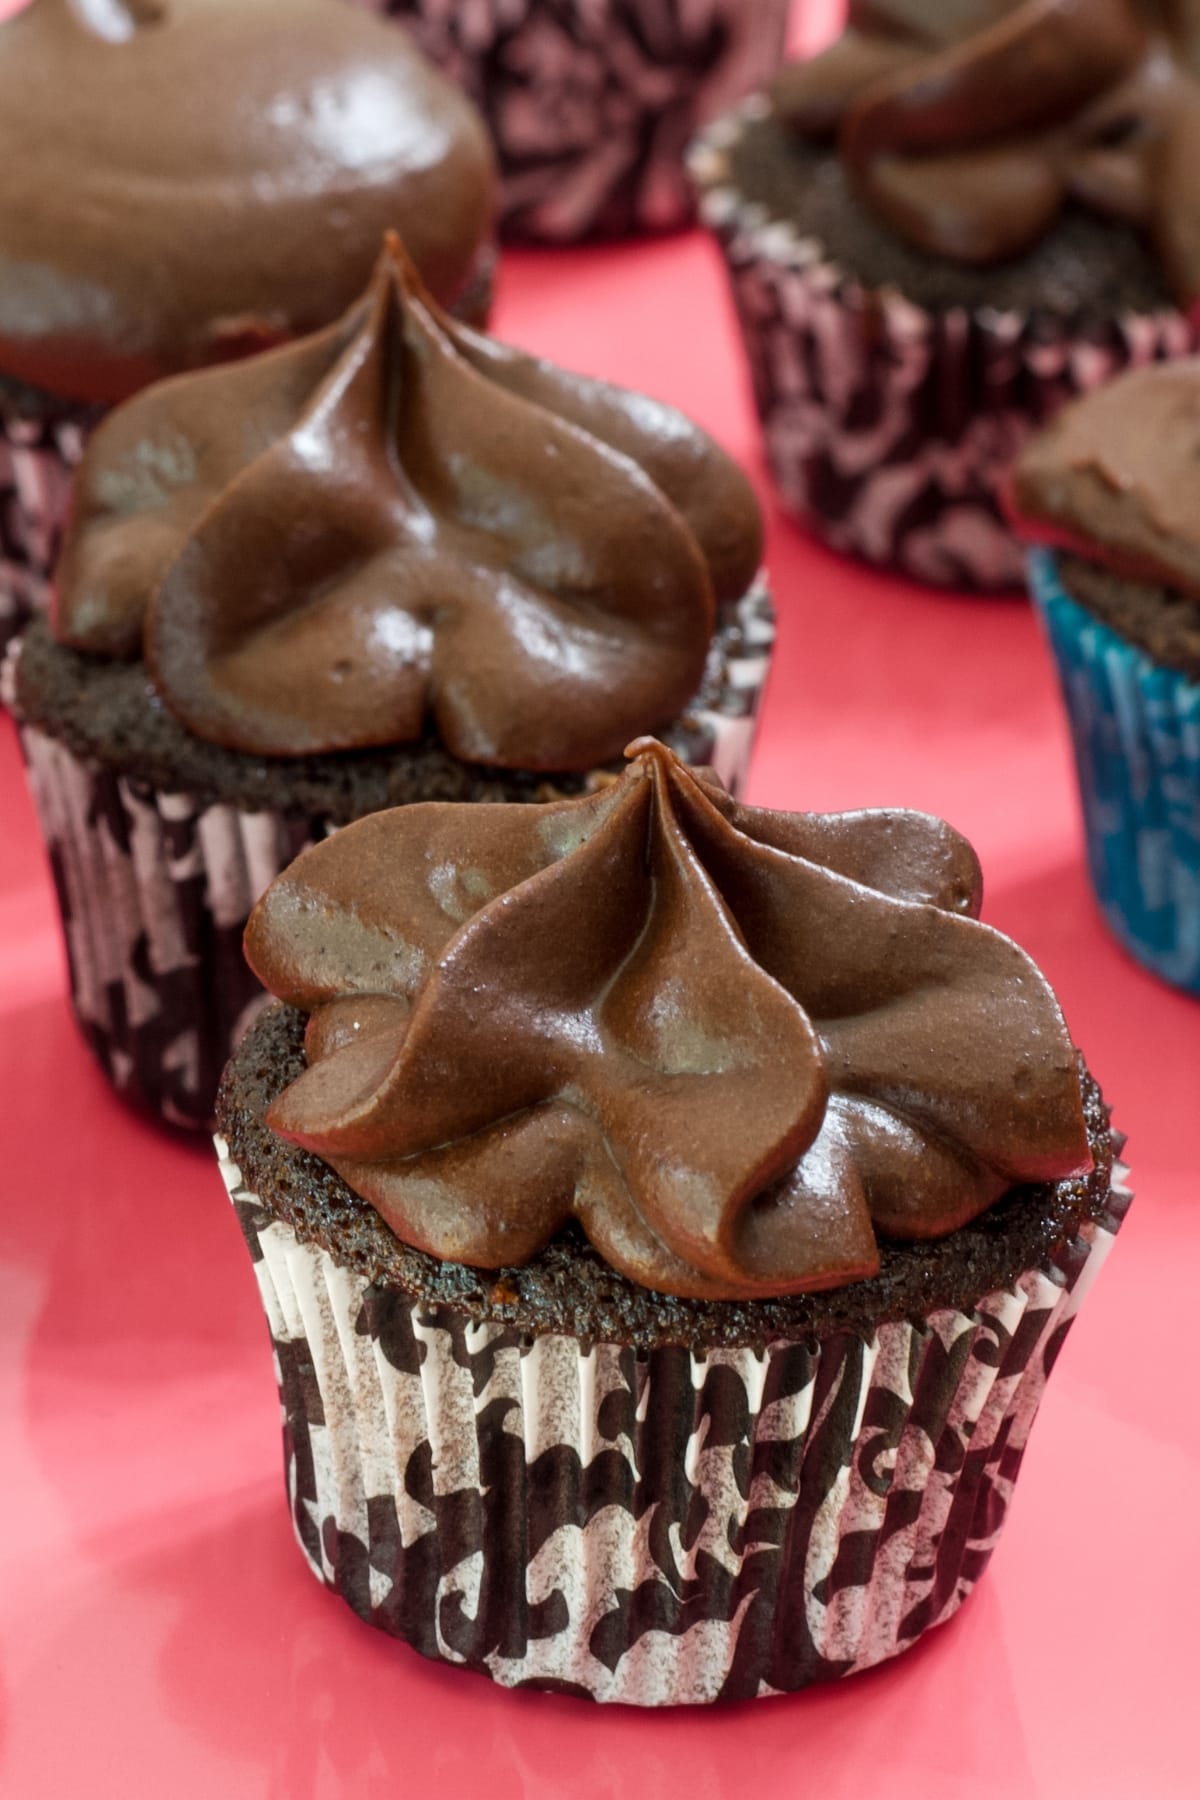 A mini chocolate cupcake with chocolate frosting piped on it.